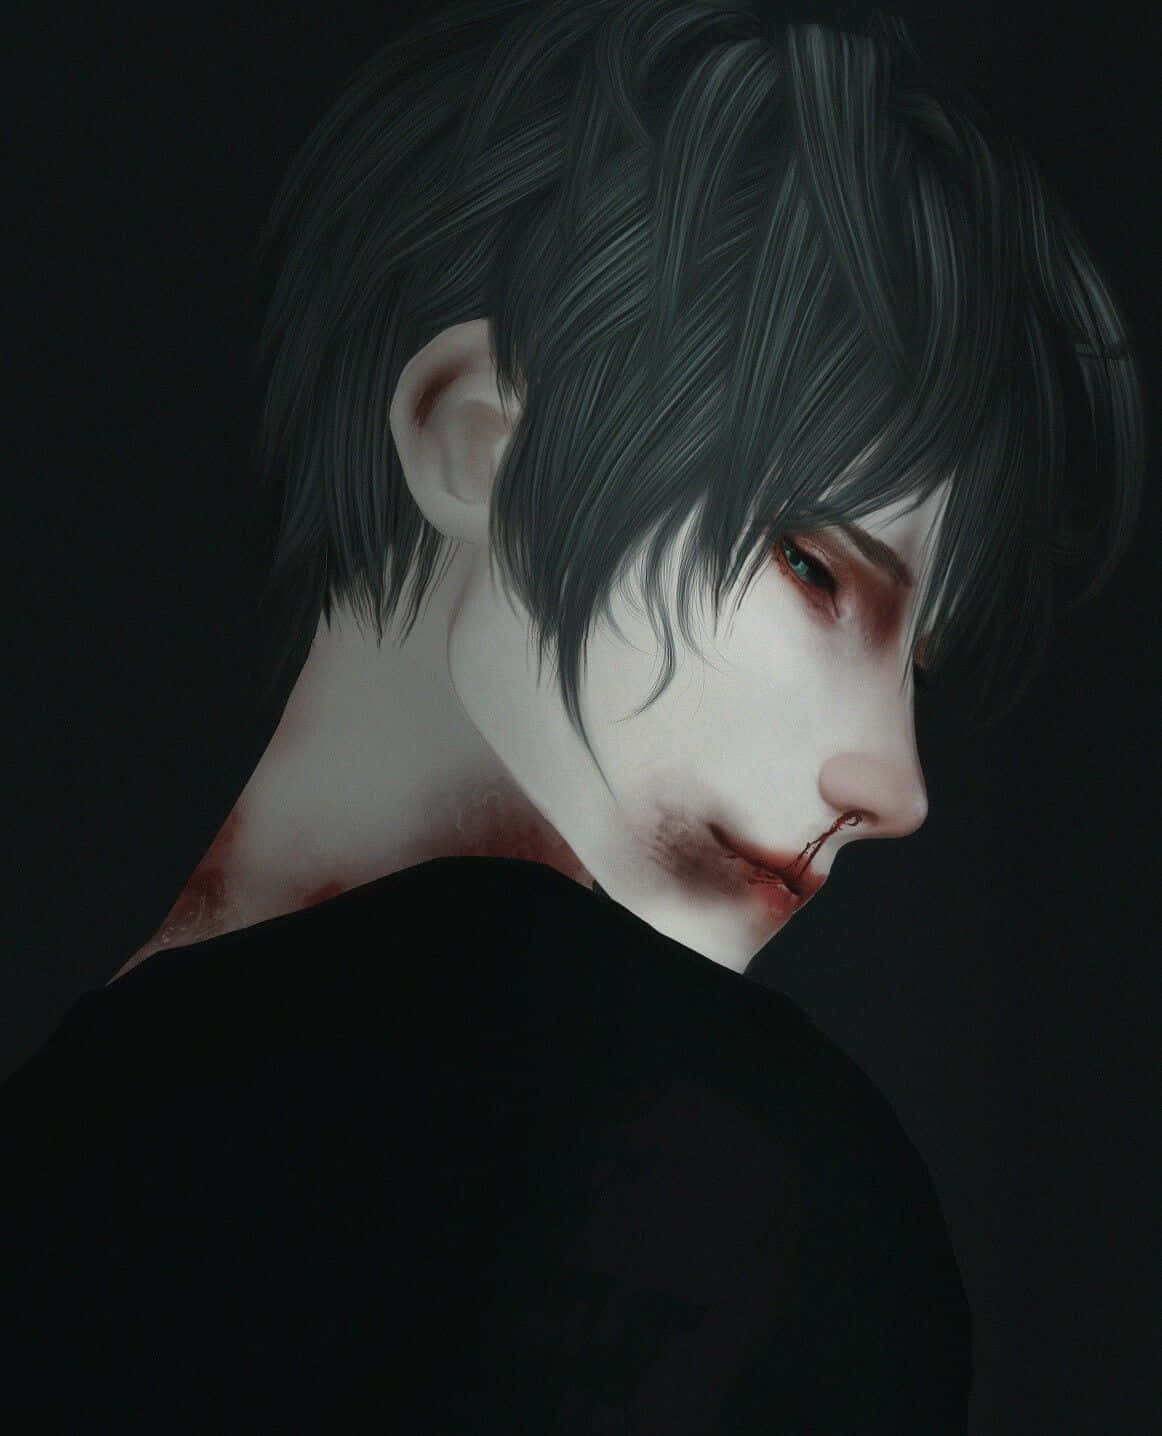 A surreal horror anime boy stares from a dark world. Wallpaper